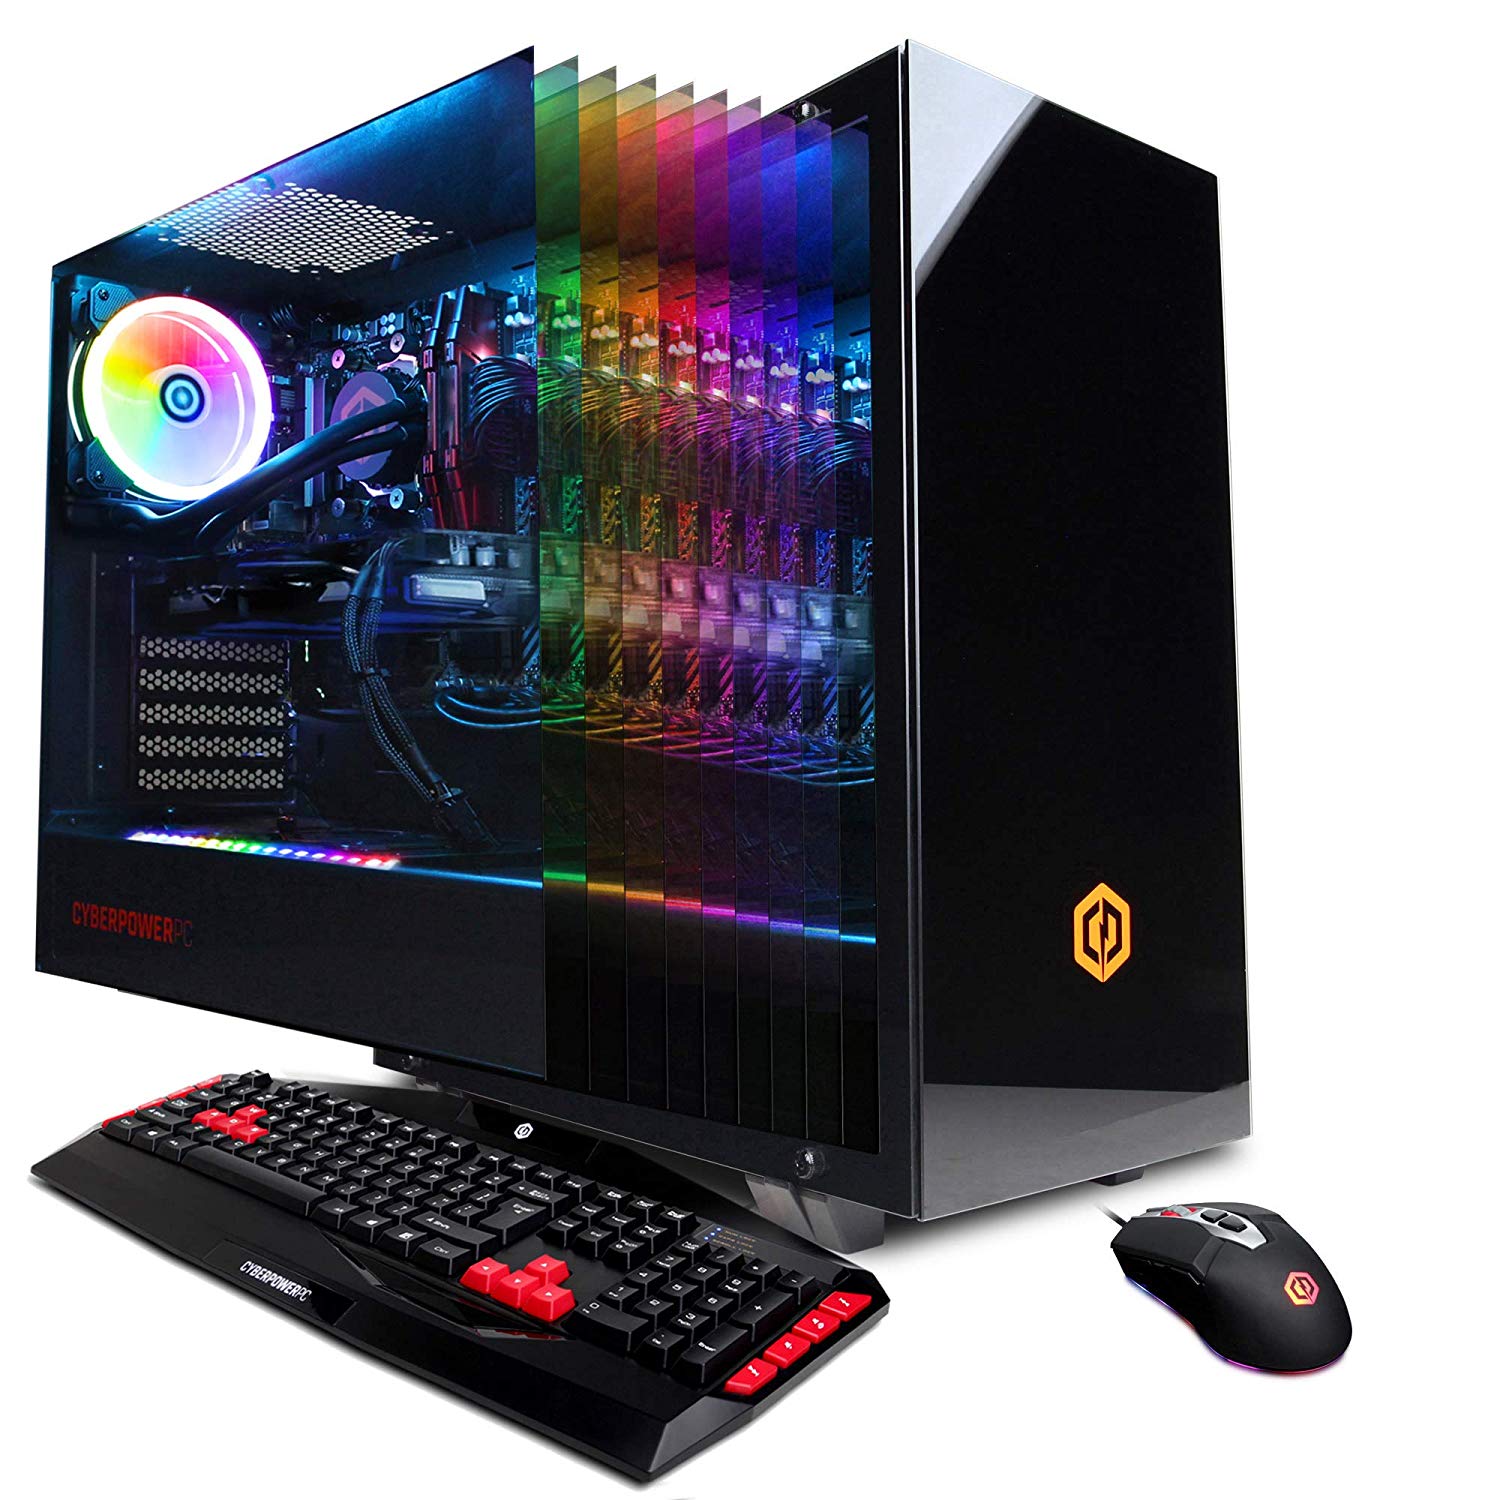 Black Friday 2019: 15% Off CyberpowerPC Gamer Xtreme VR Gaming PC